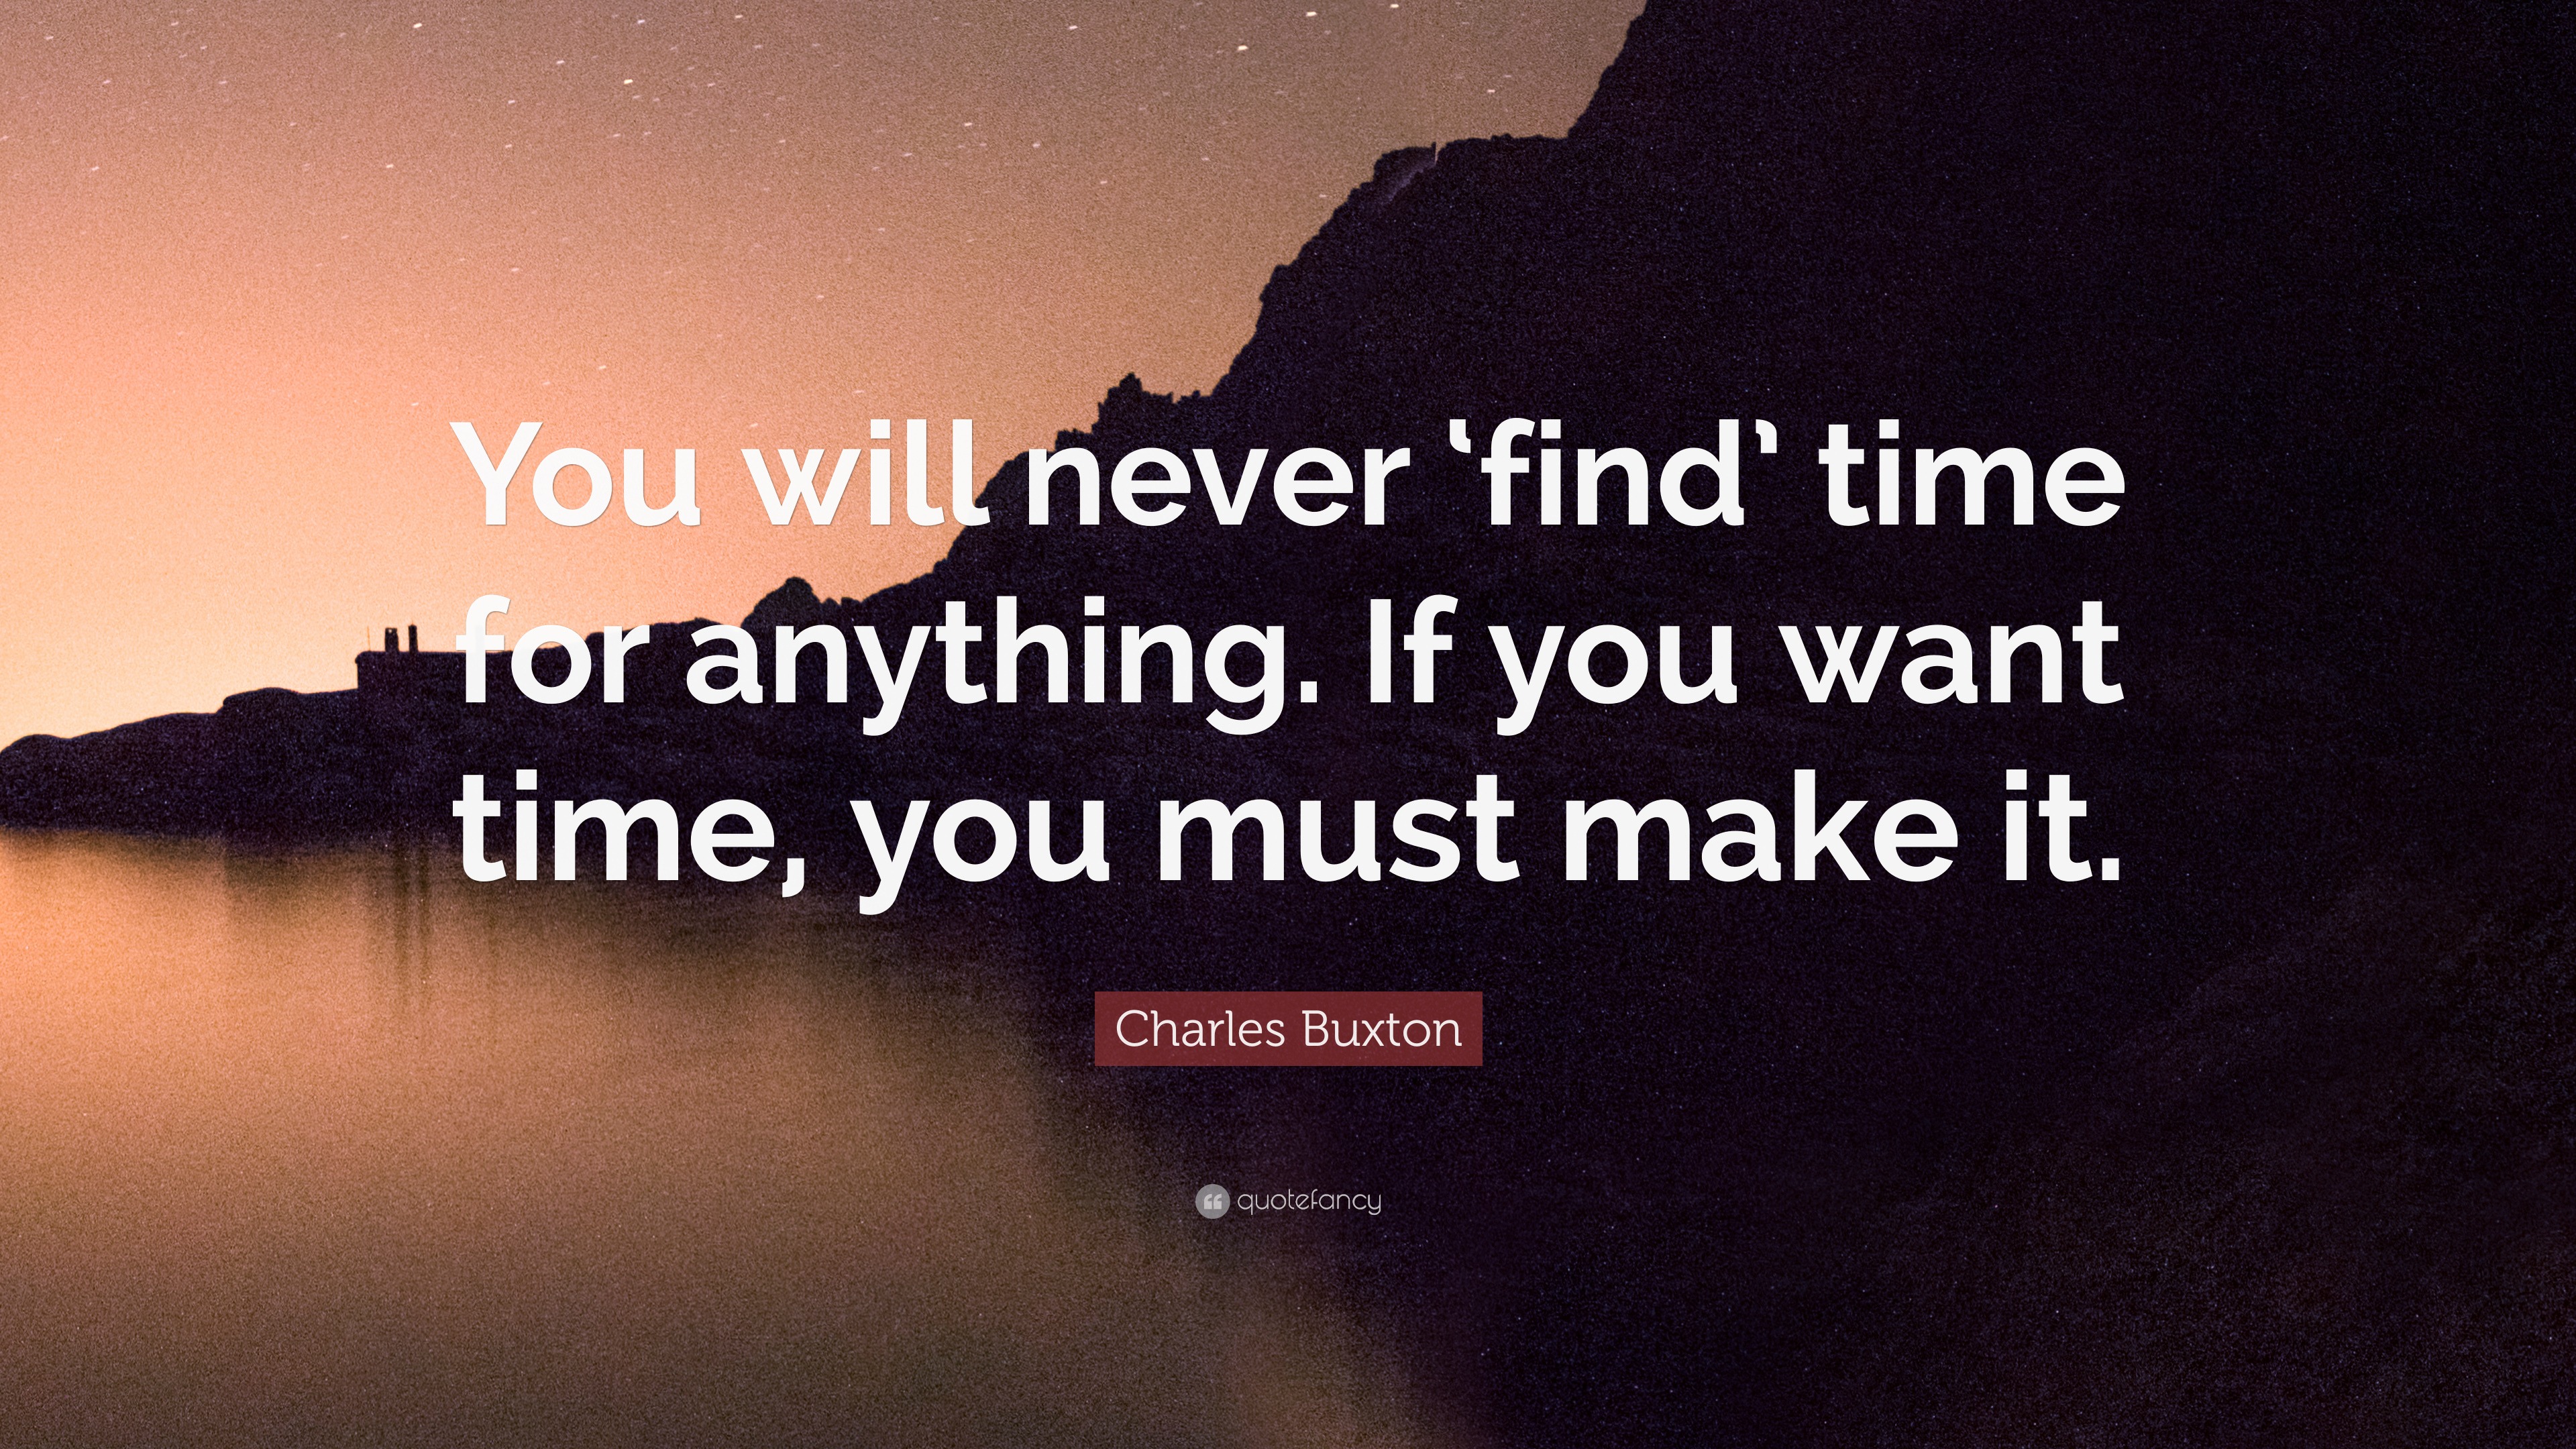 Charles Buxton Quote “You will never find time for anything If